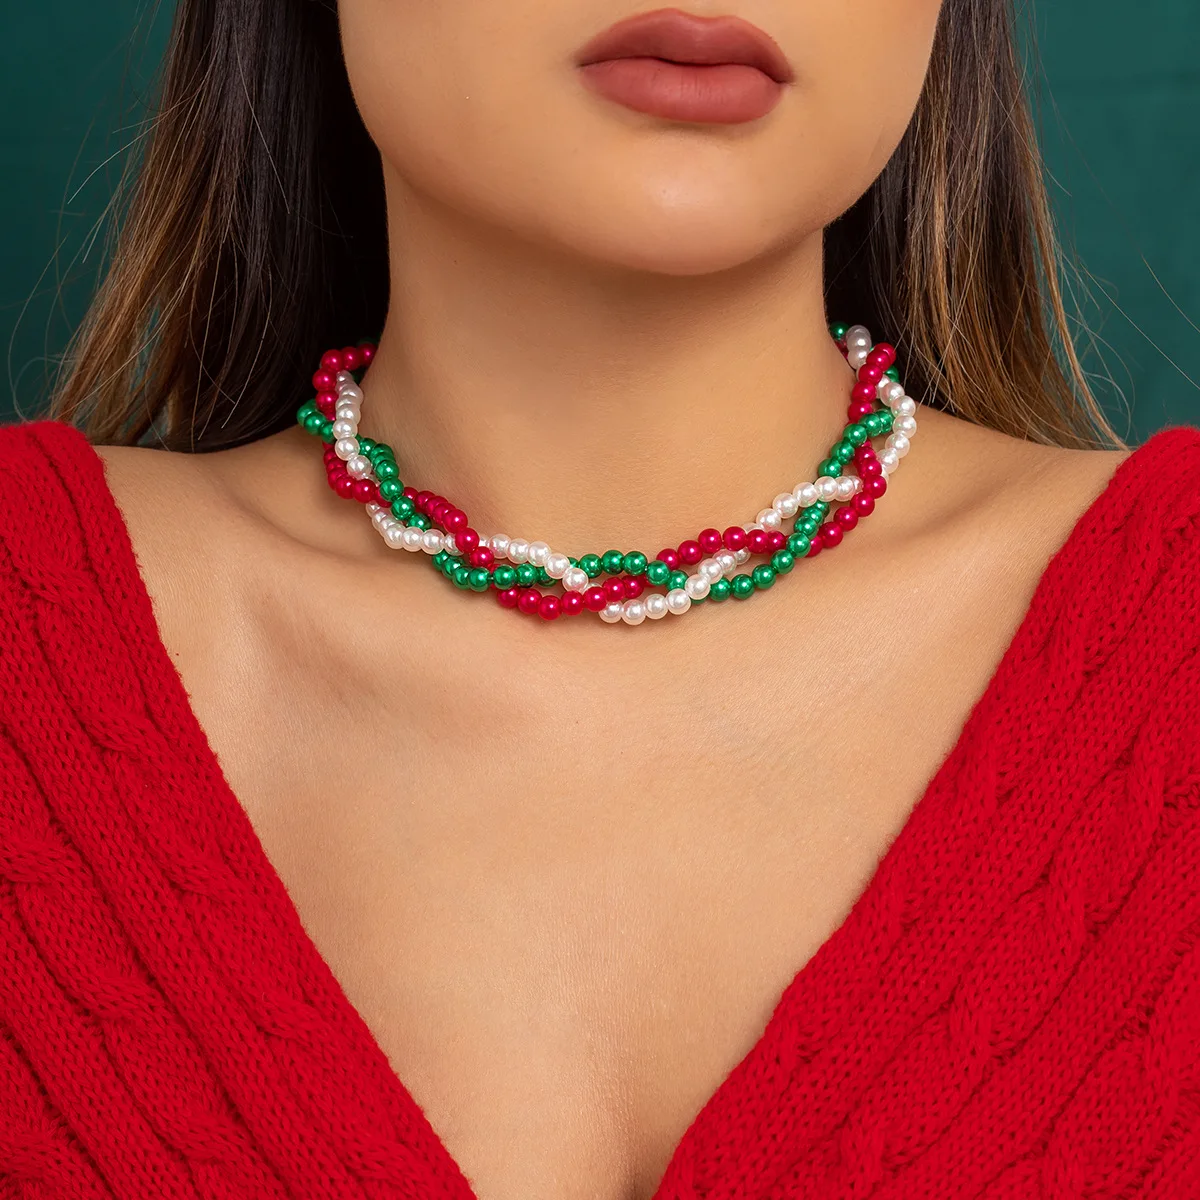 

Christmas Multilayer Pearl Beaded Necklace for Women Vintage Fashion Party Winding Colorful Necklace Collar Jewelry Xmas Gift